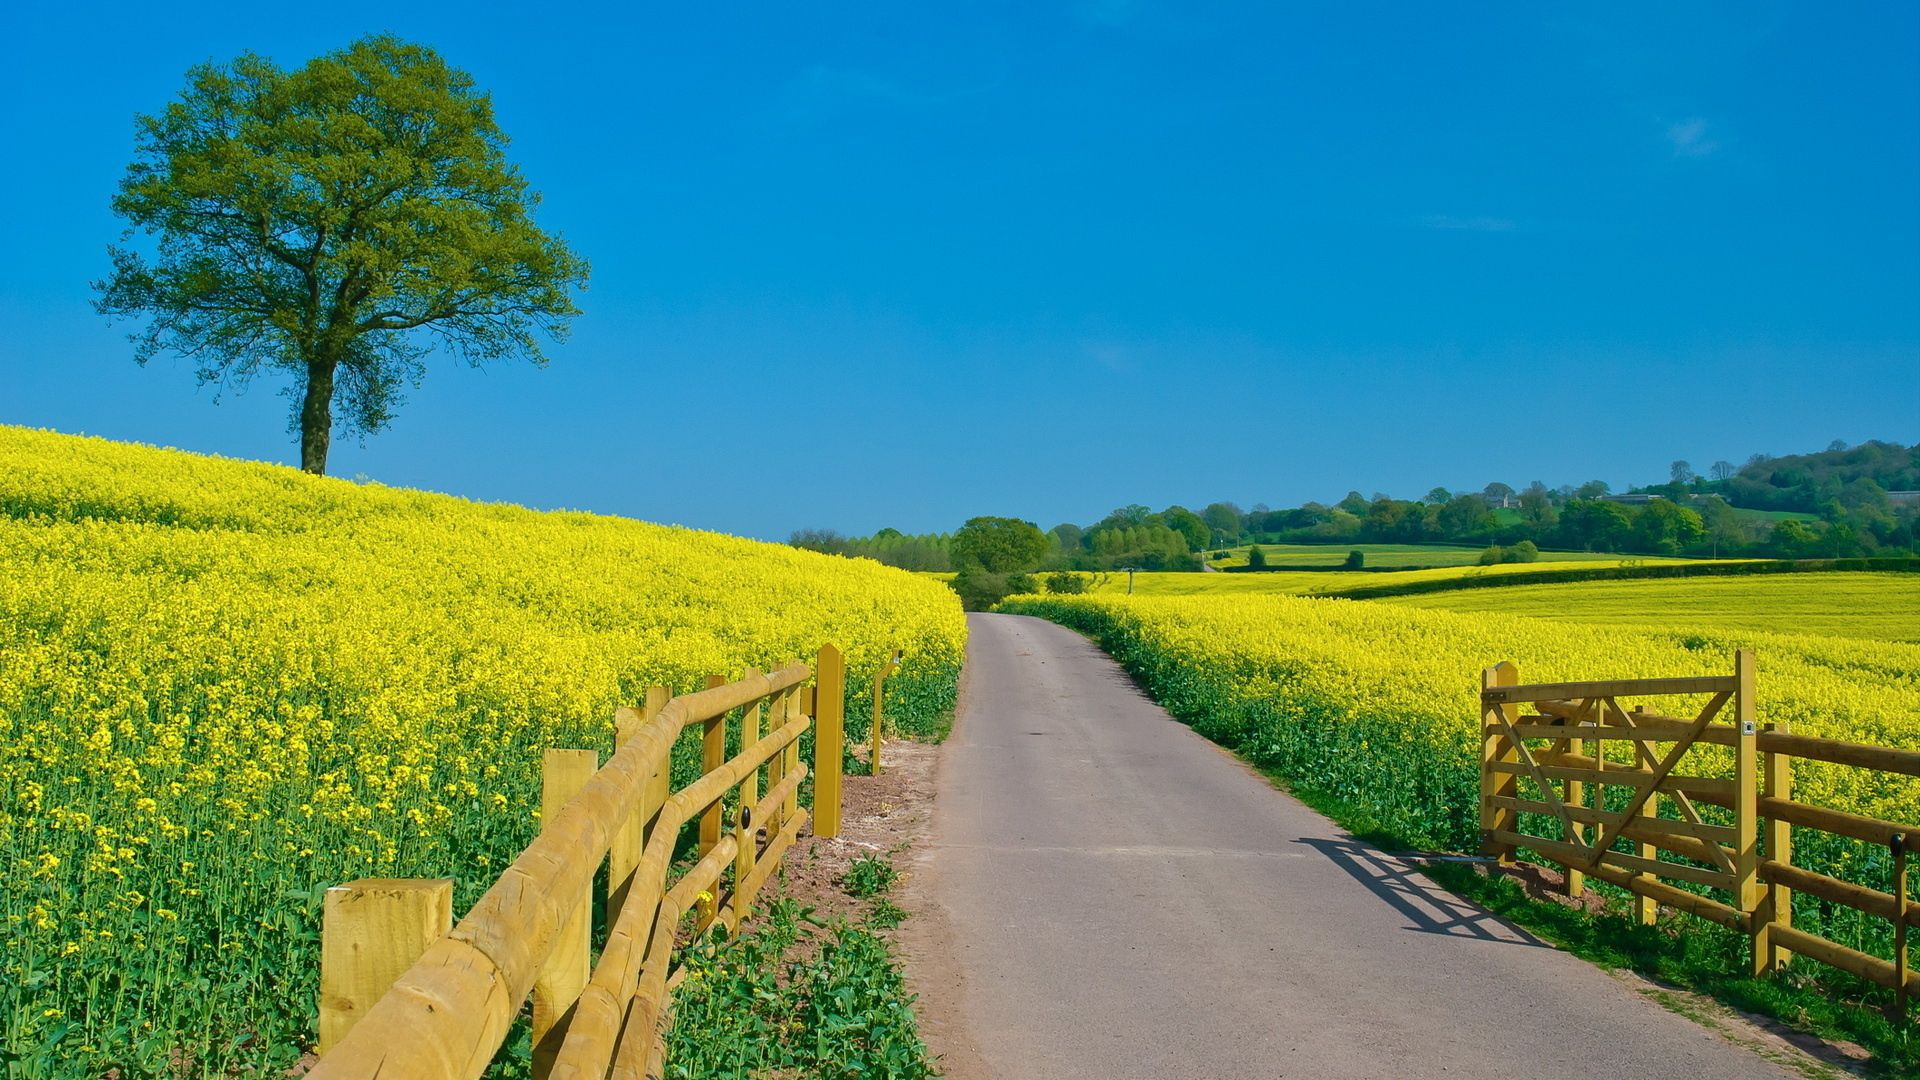 road, open spaces, summer, expanse, flowers, slopes, yellow, nature, fencing, enclosure, day